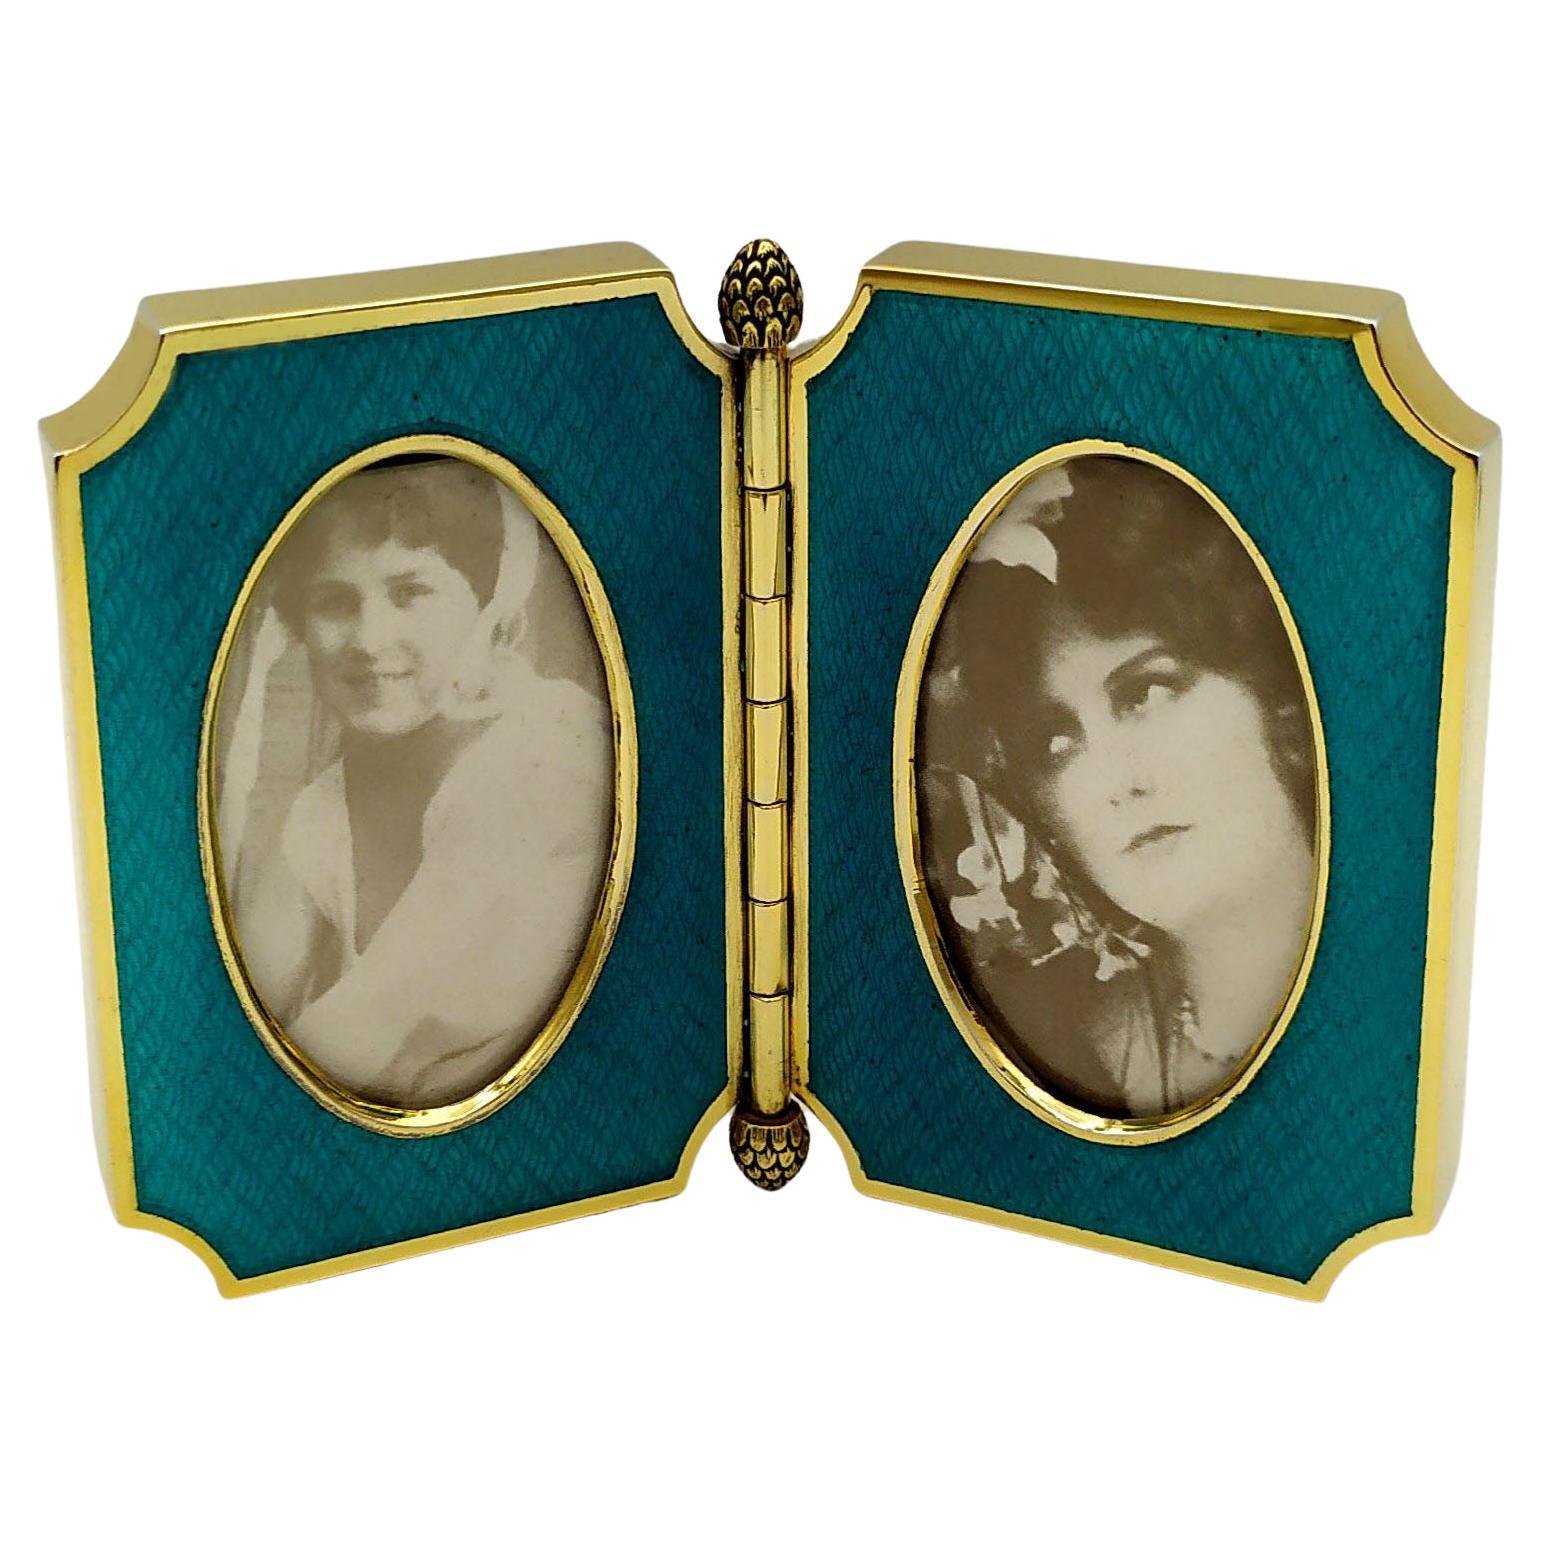 Photo Frame Double Opening Fired Enamel on Guillochè Sterling Silver Saliimbeni For Sale